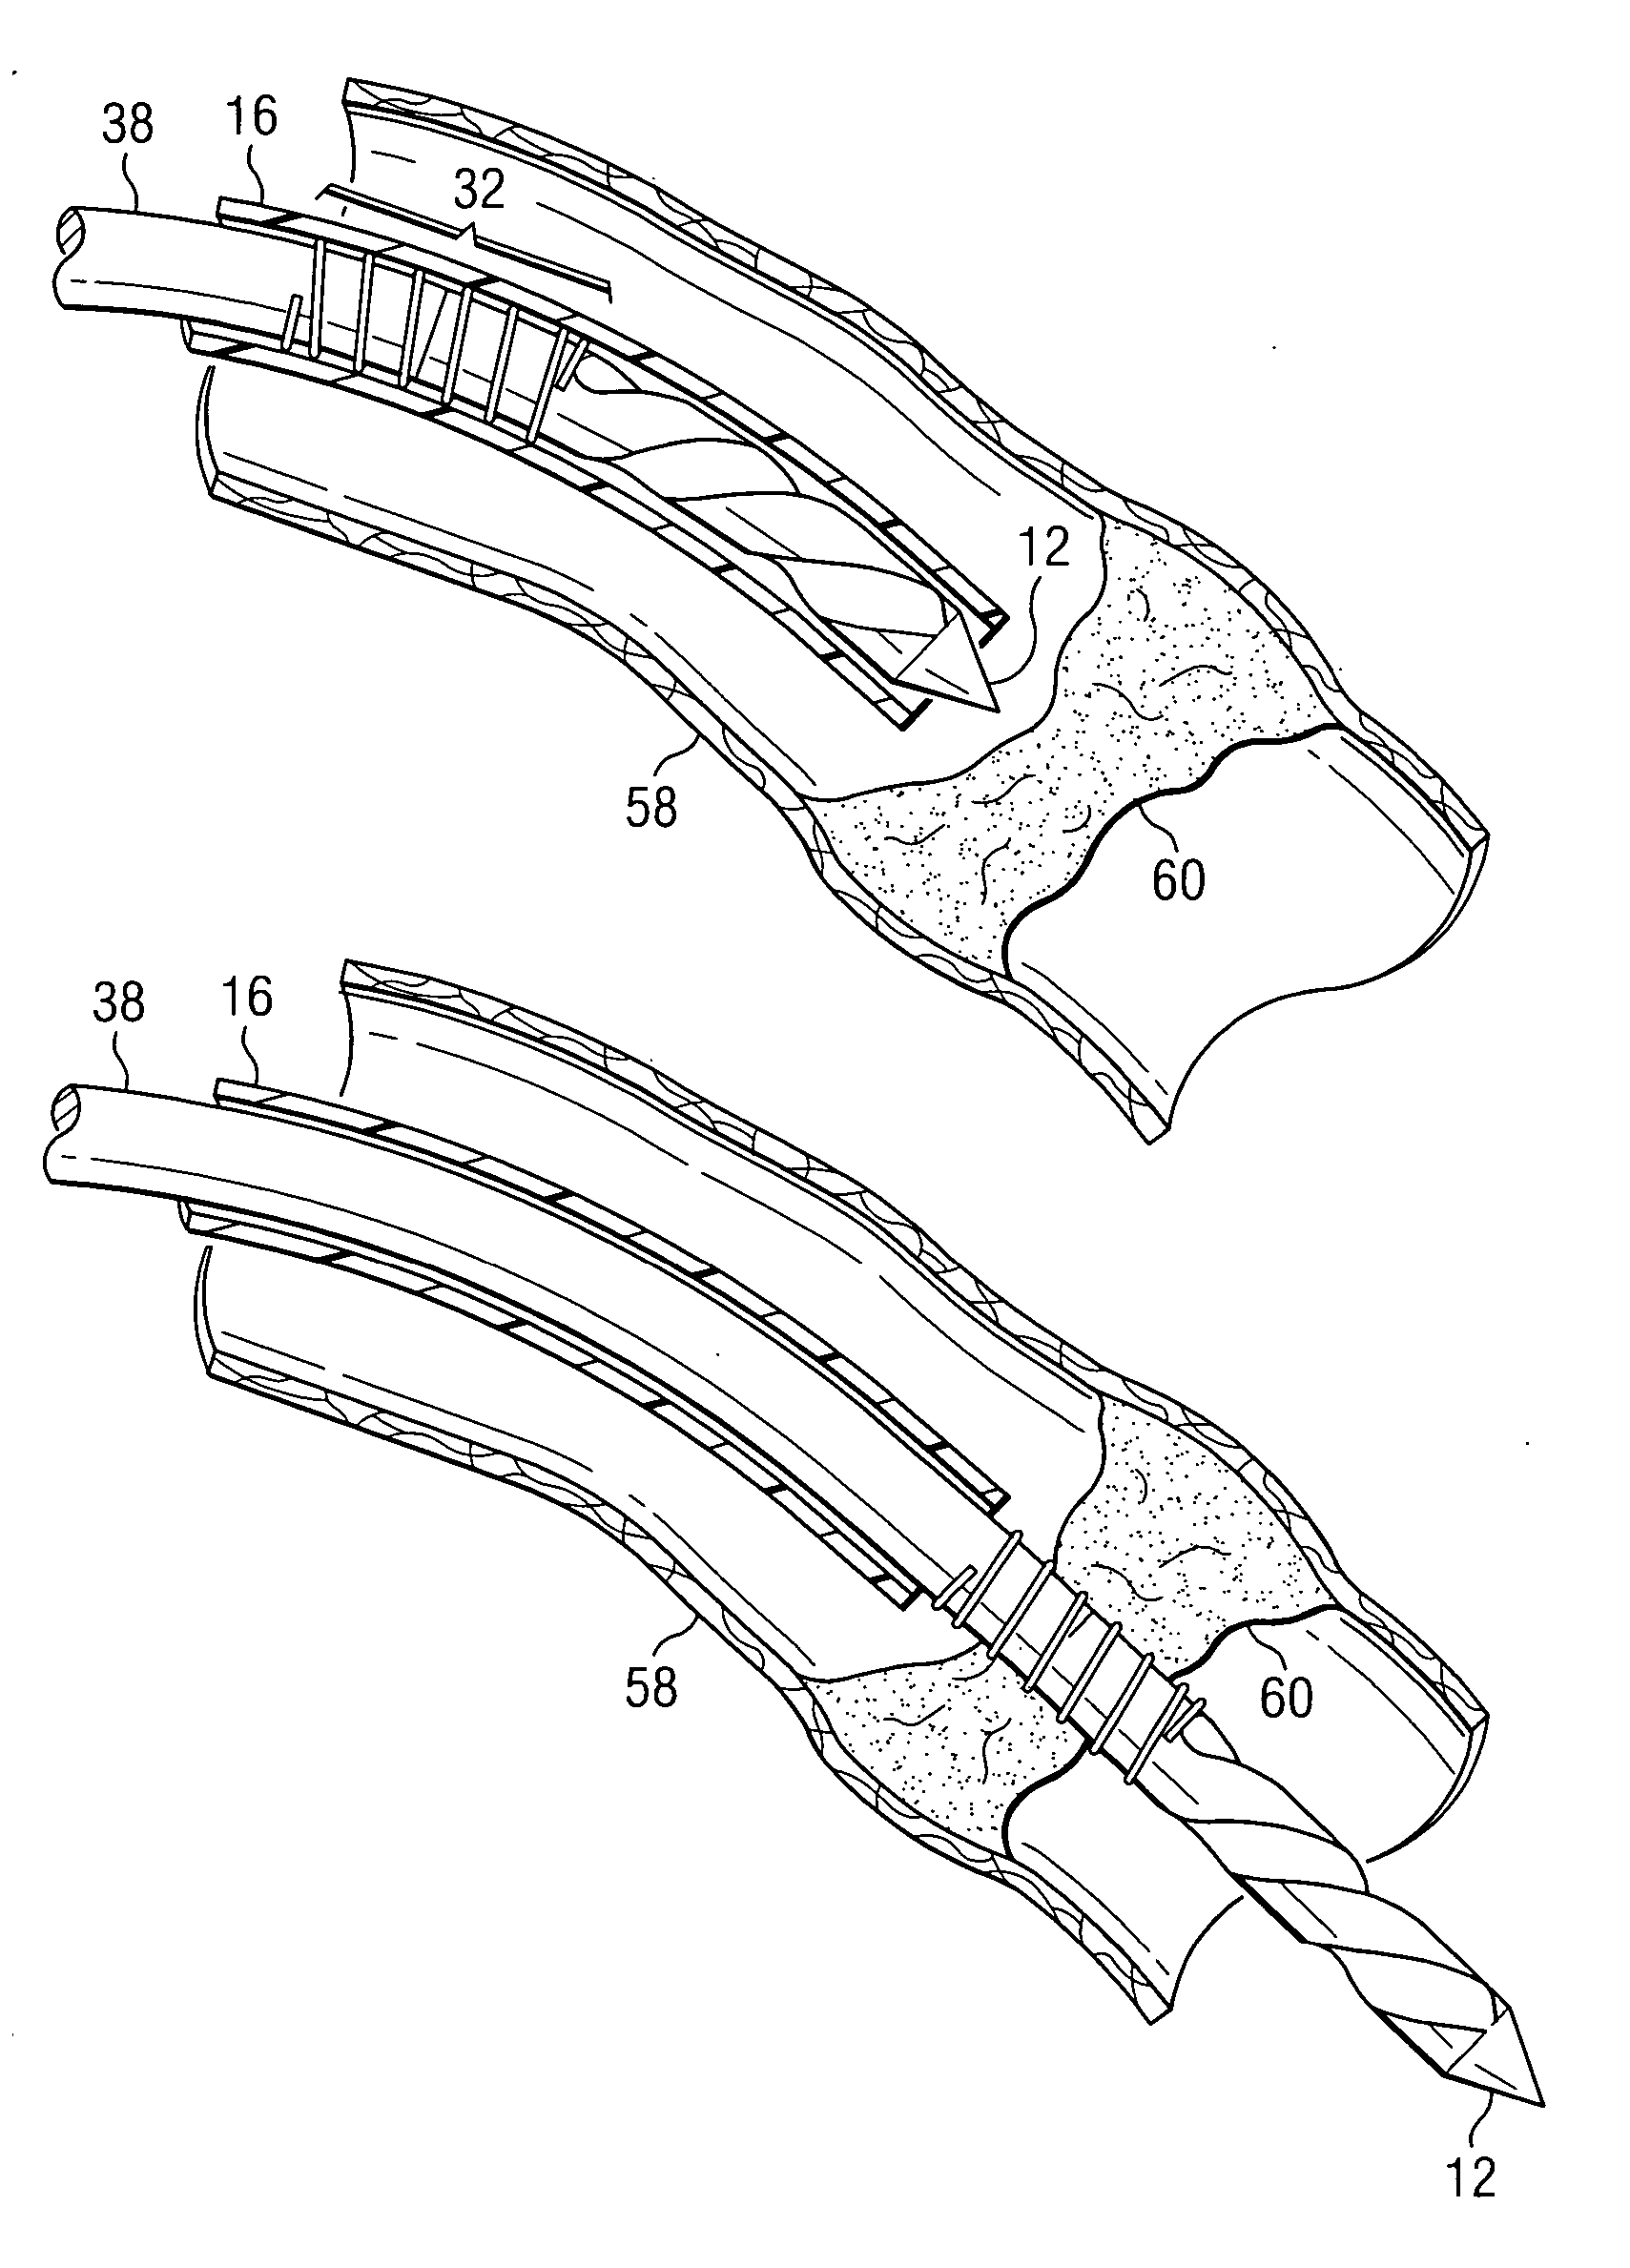 System and method for addressing total occlusion in a vascular environment